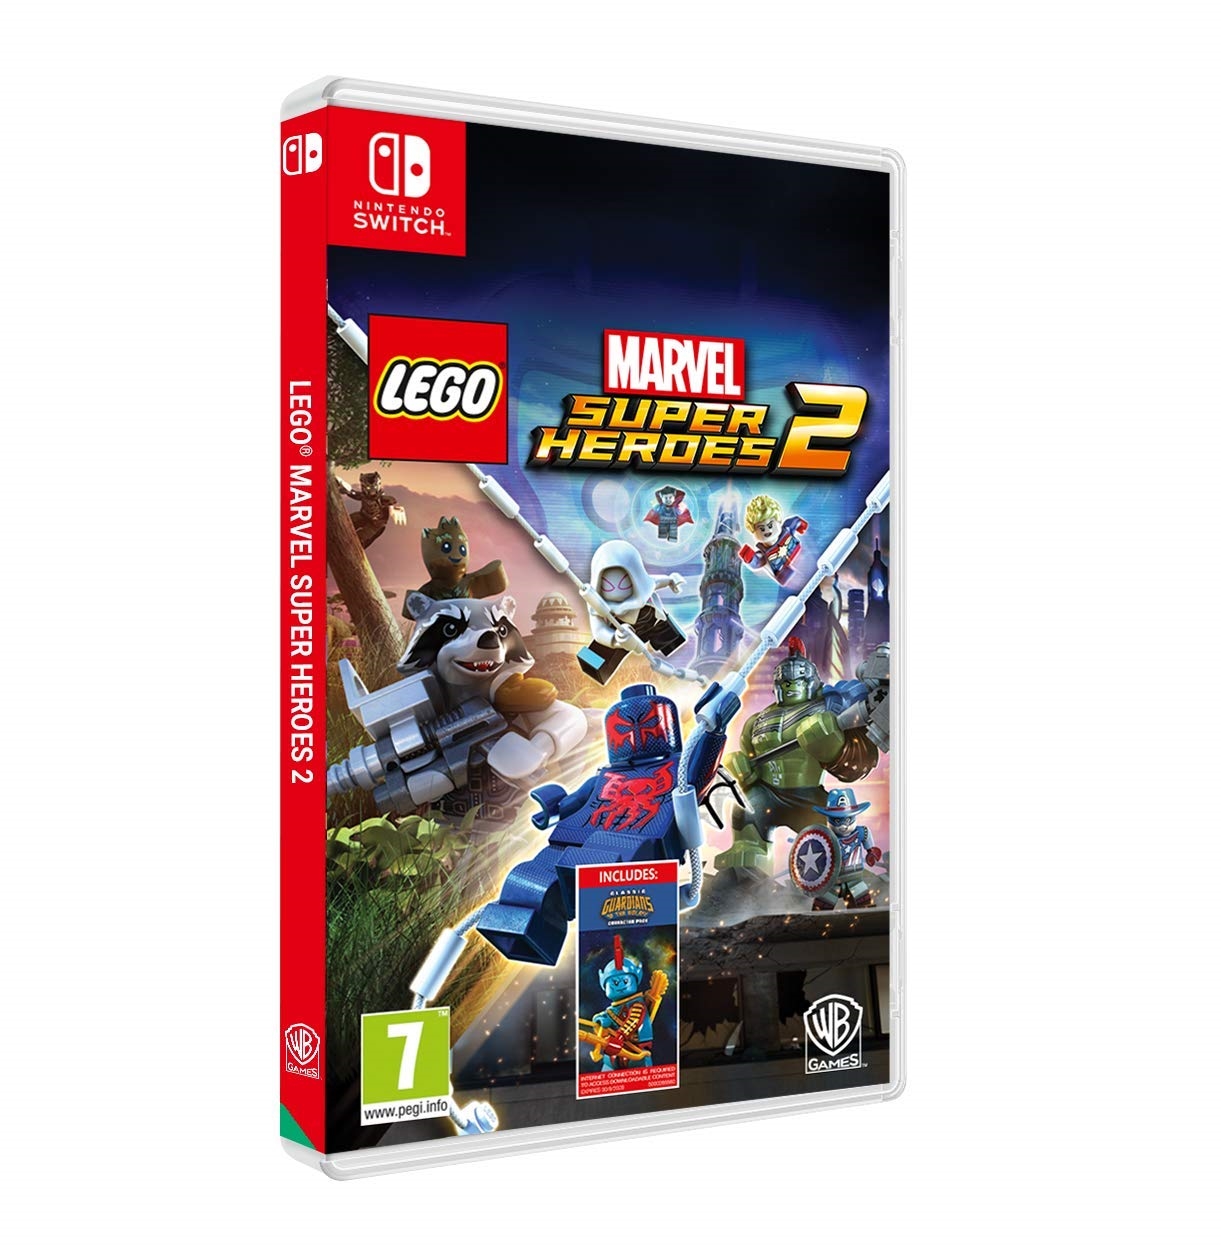 At passe hval Forekomme LEGO® Marvel Super Heroes 2 - Nintendo Switch